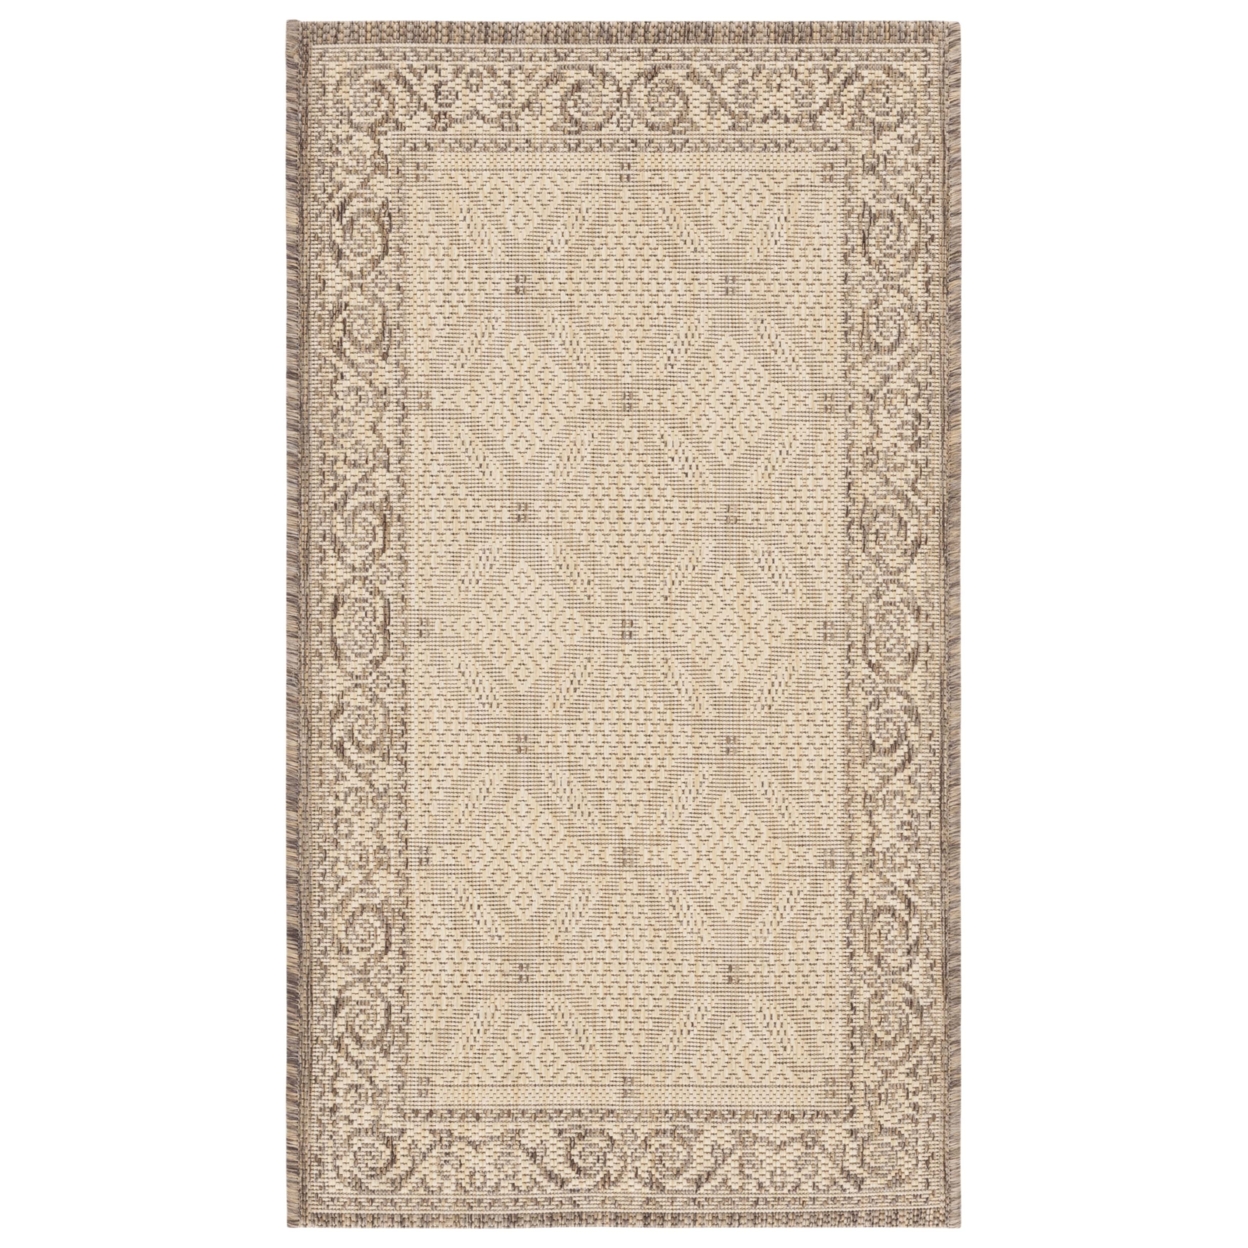 SAFAVIEH Outdoor CY1502-3001 Courtyard Natural / Brown Rug - 2' 3 X 6' 7